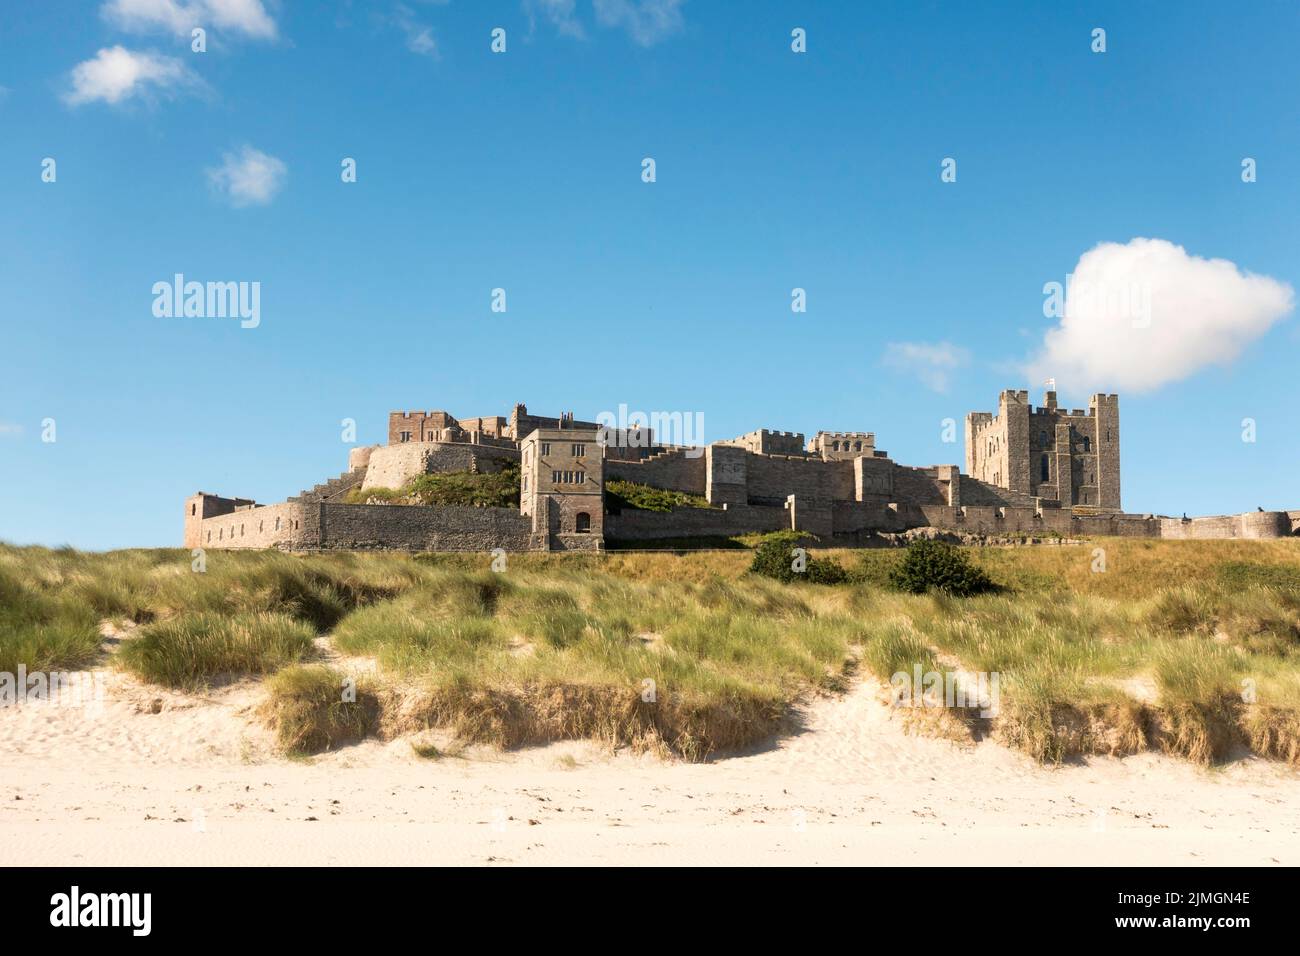 East facade of Bamburgh castle seen from the beach, Northumberland, England, UK Stock Photo